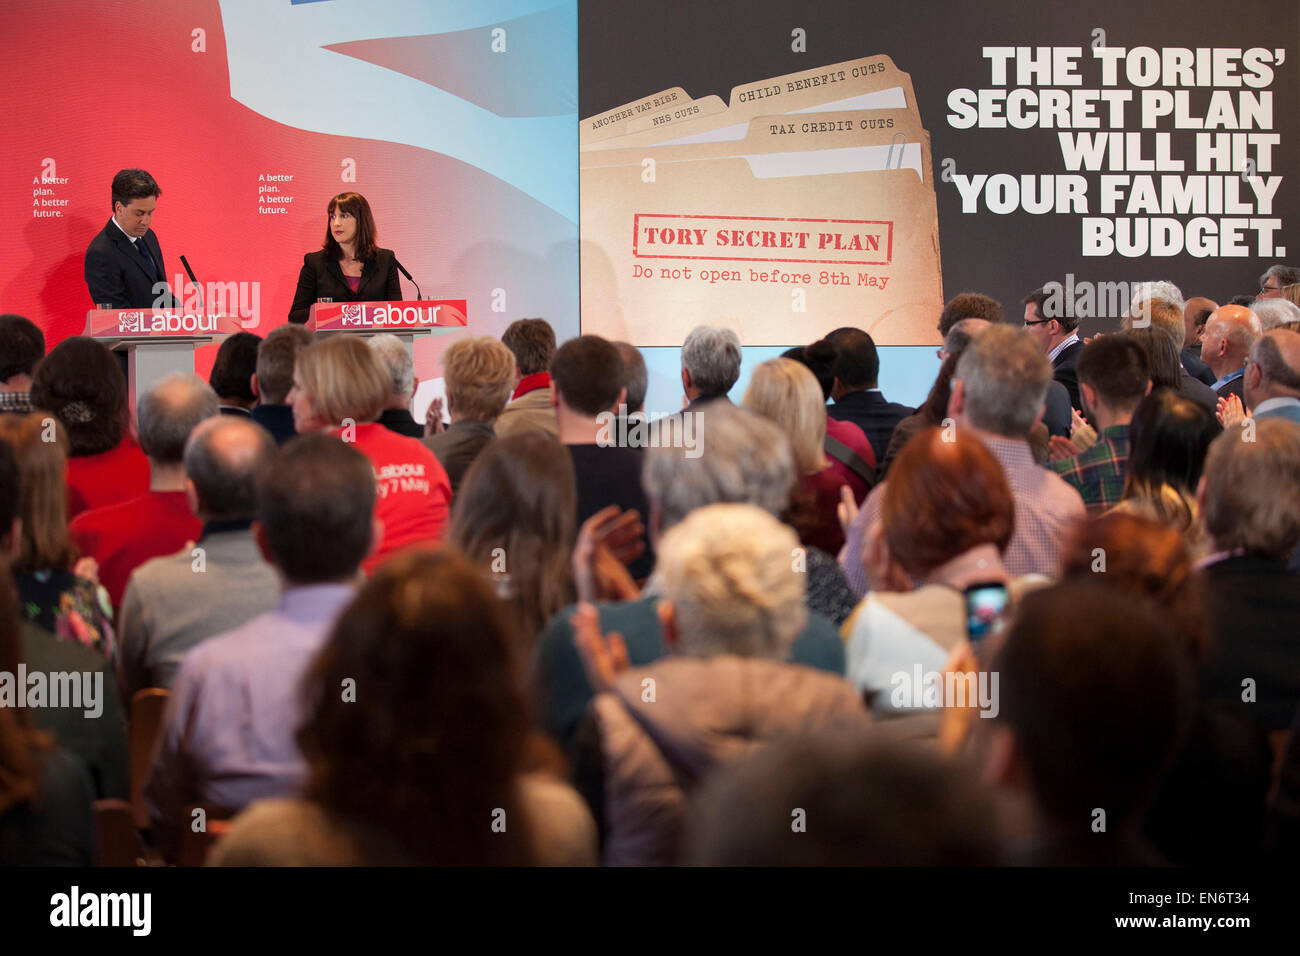 London, UK. Wednesday 29th April 2015. Labour Party Leader Ed Miliband and Shadow Secretary of State for Work and Pensions Rachel Reeves speaks at a General Election 2015 campaign event on the Tory threat to family finances, entitled: The Tories’ Secret Plan. Held at the Royal Institute of British Architects. Credit:  Michael Kemp/Alamy Live News Stock Photo